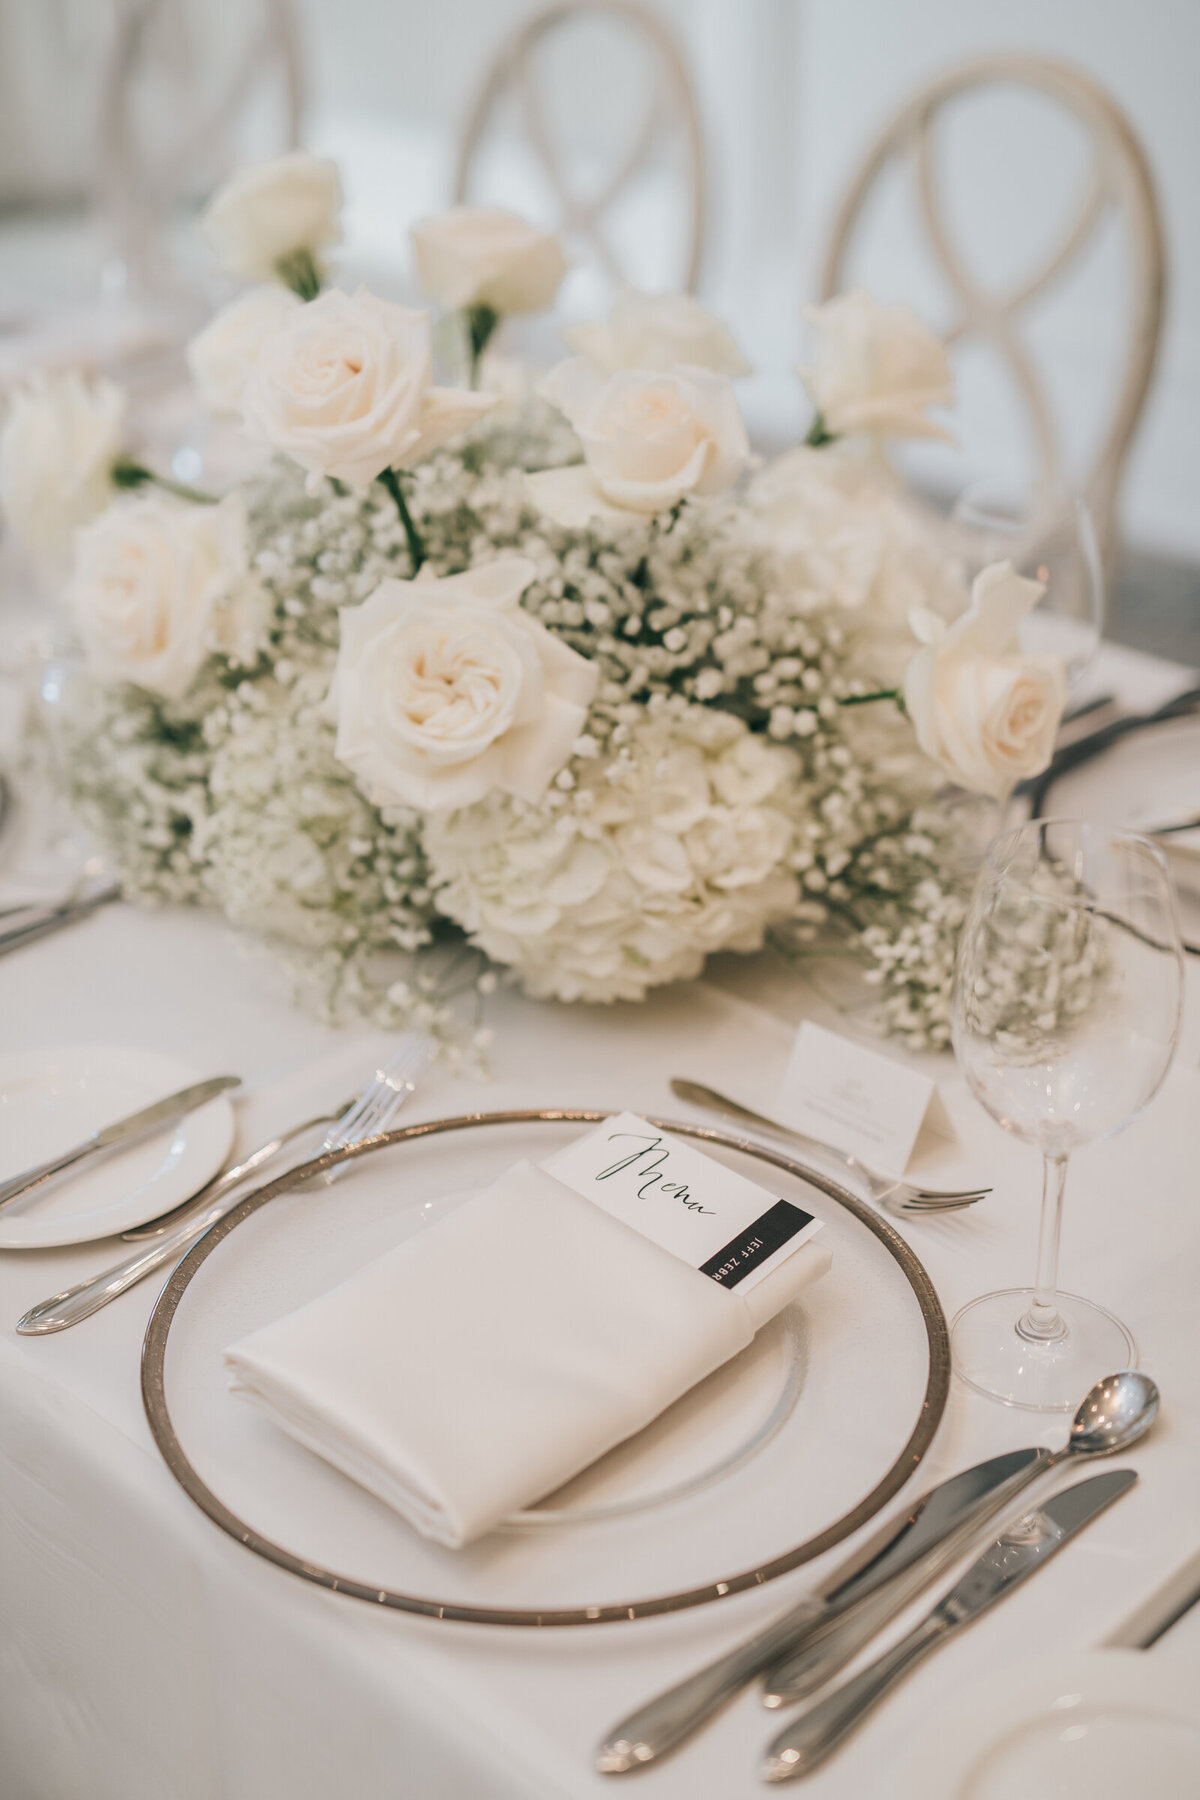 Gorgeous white wedding reception decor, florals and table settings